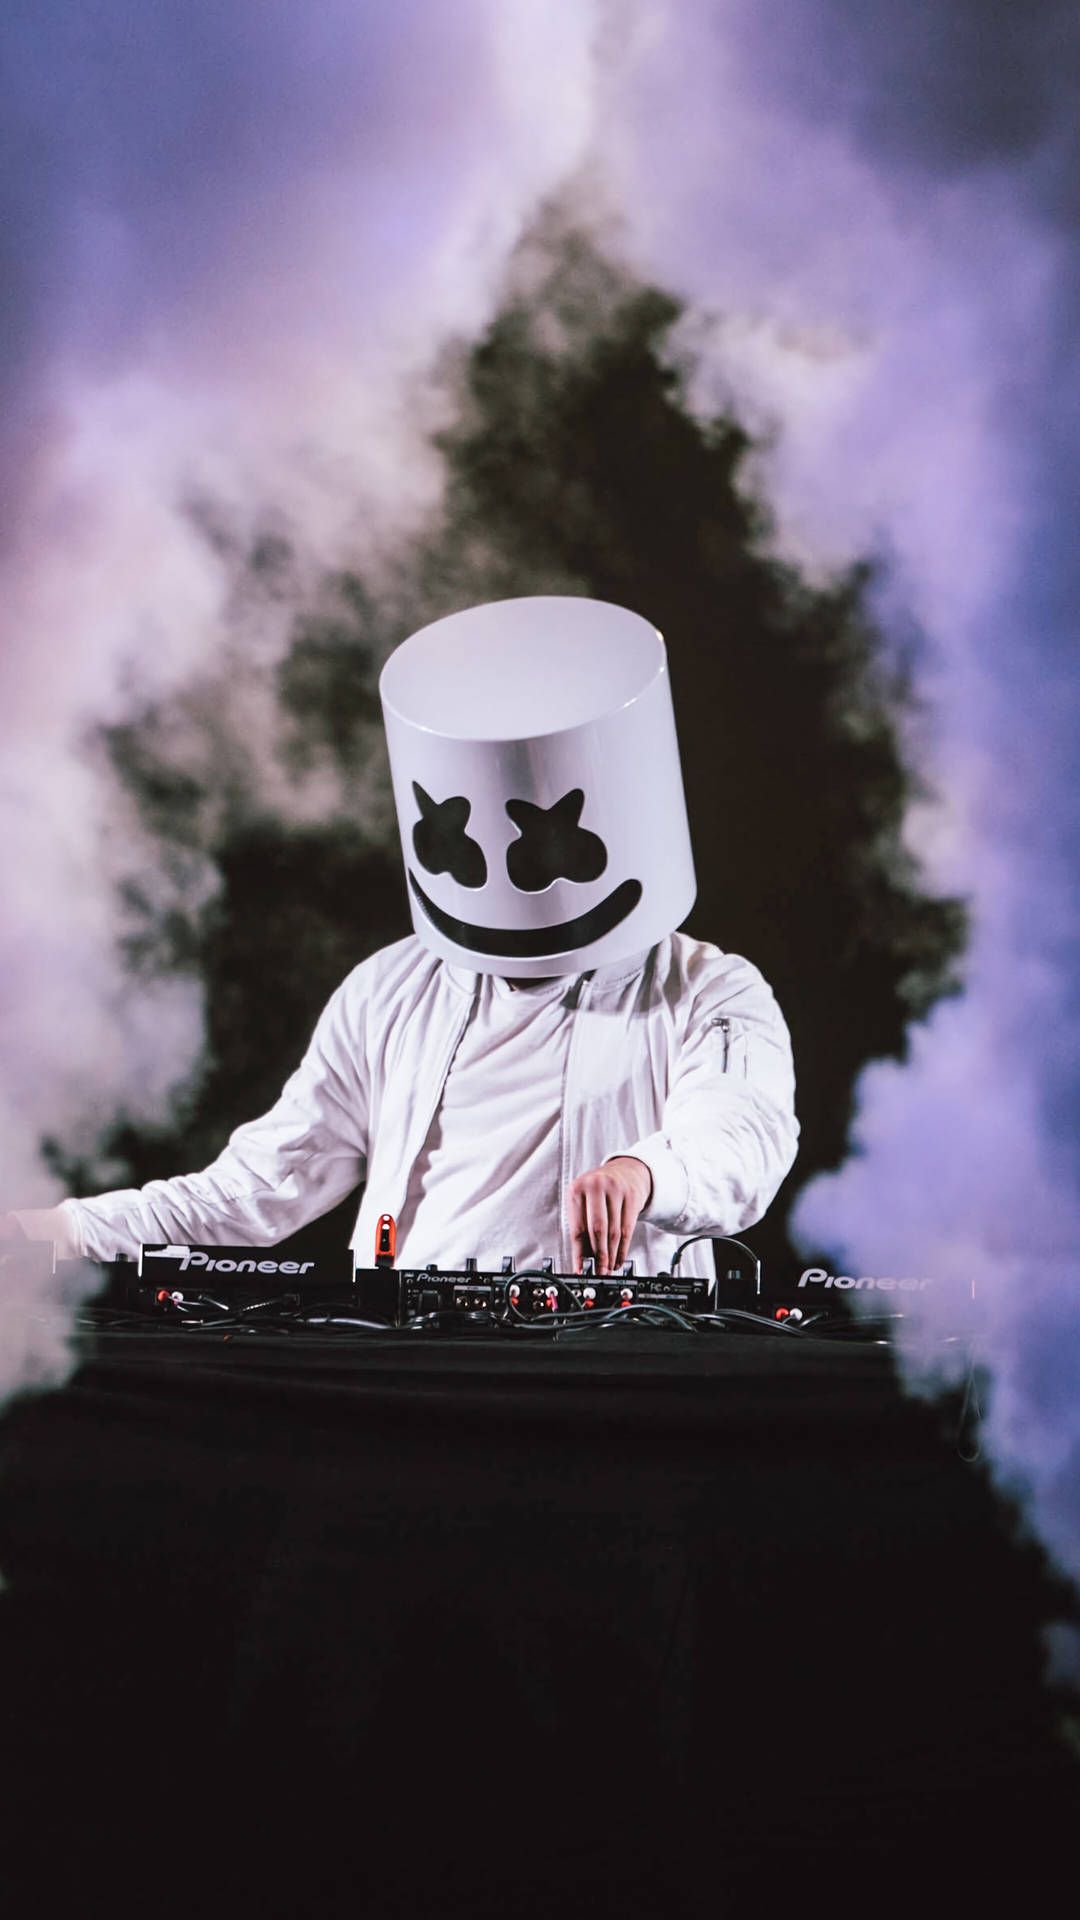 Marshmello in a white shirt mixing music on a Pioneer DJ turntable. - Marshmello